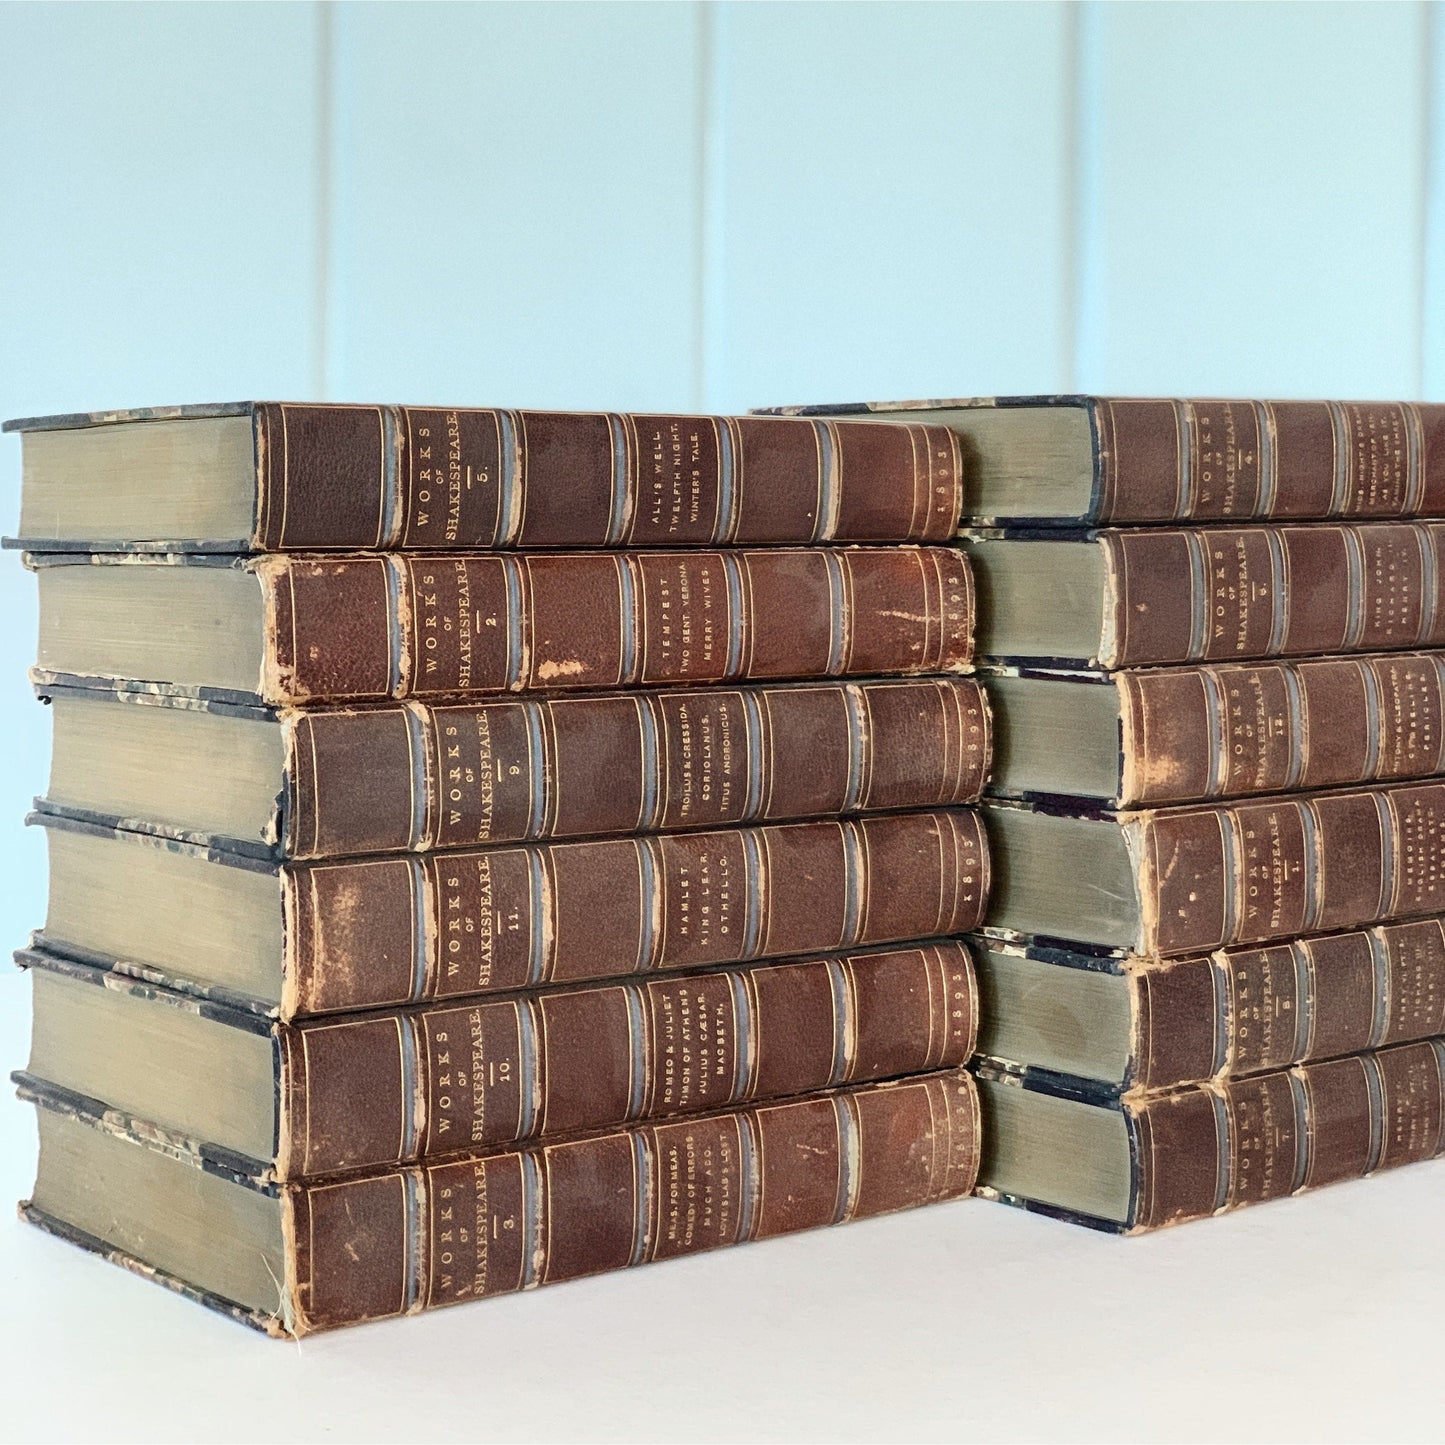 The Works of William Shakespeare In Twelve Volumes, Richard Grant White, 1893, Leather Bound